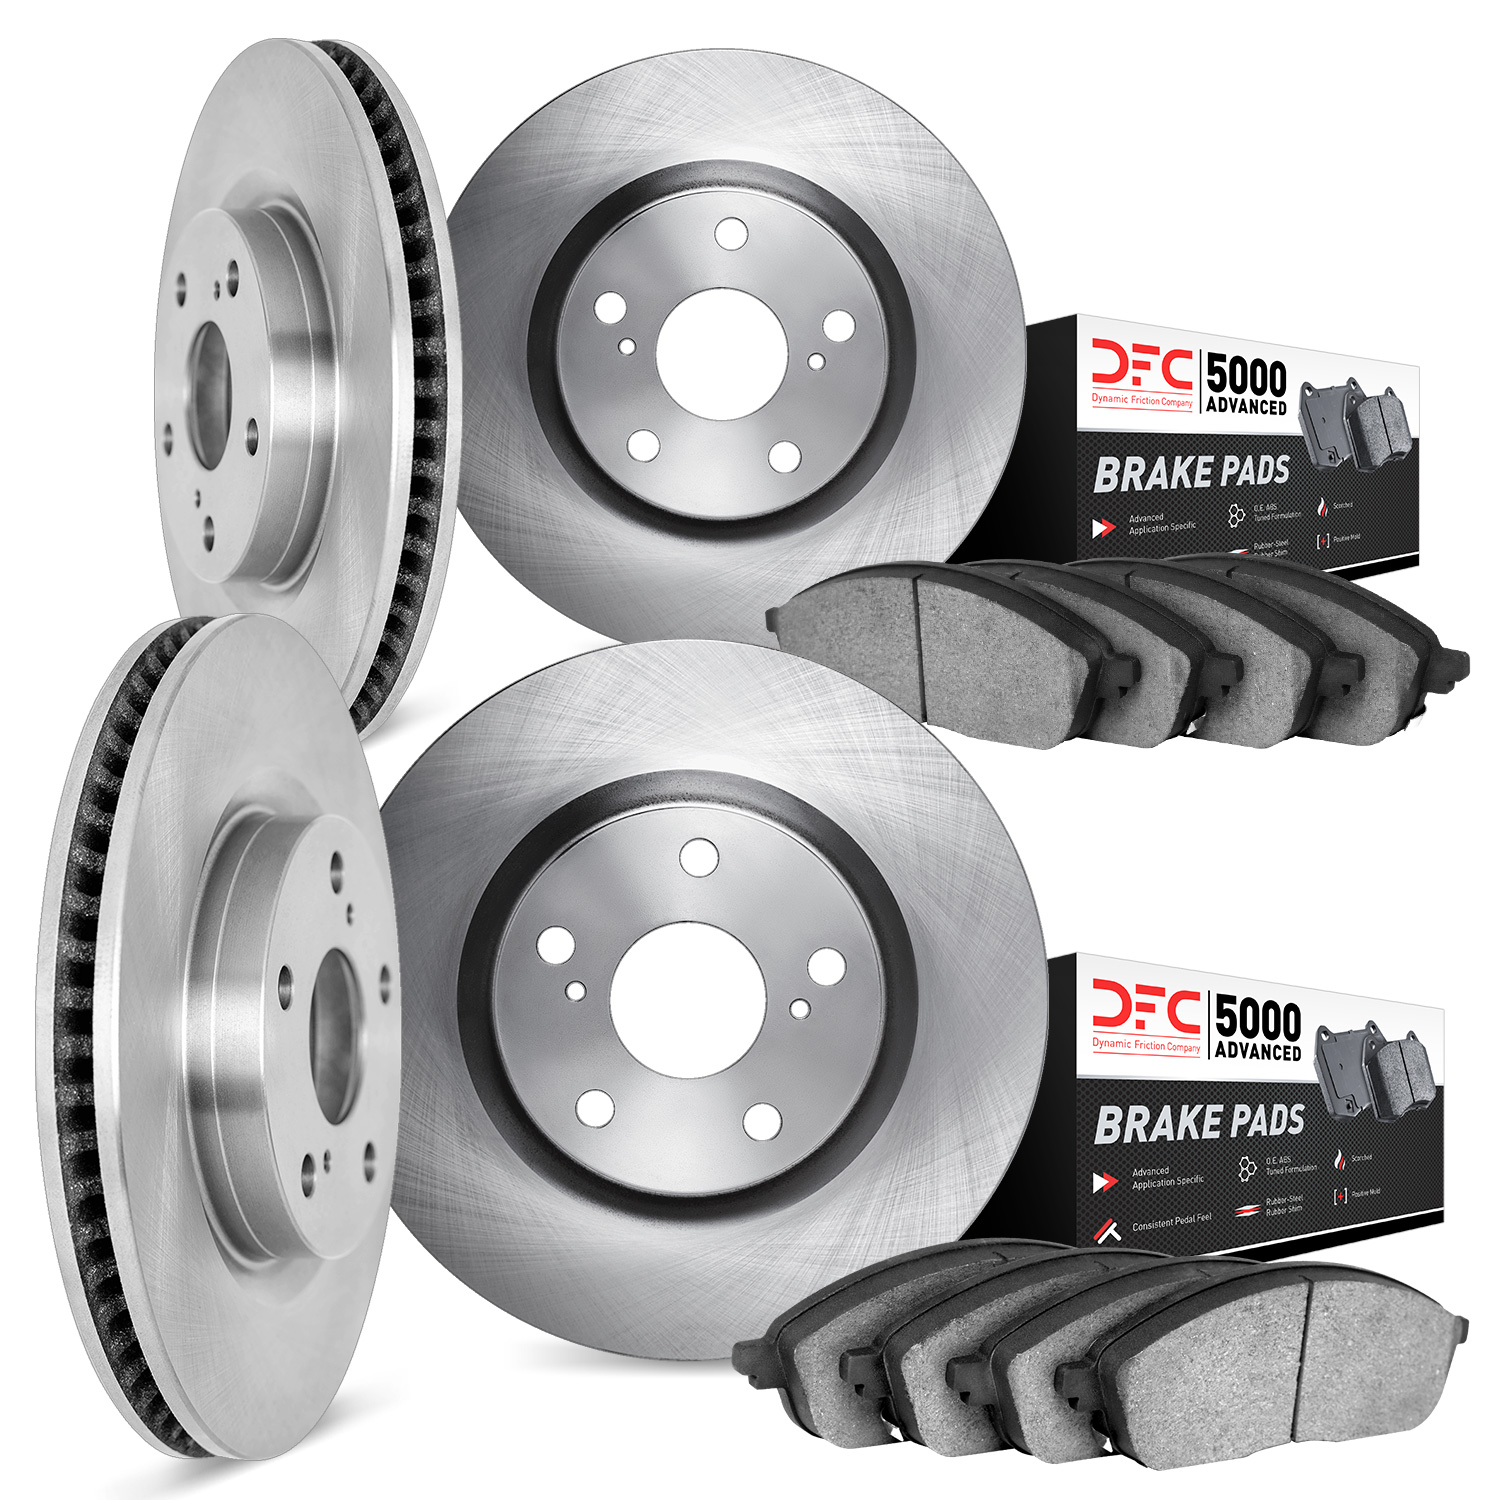 6504-31097 Brake Rotors w/5000 Advanced Brake Pads Kit, 2008-2013 BMW, Position: Front and Rear